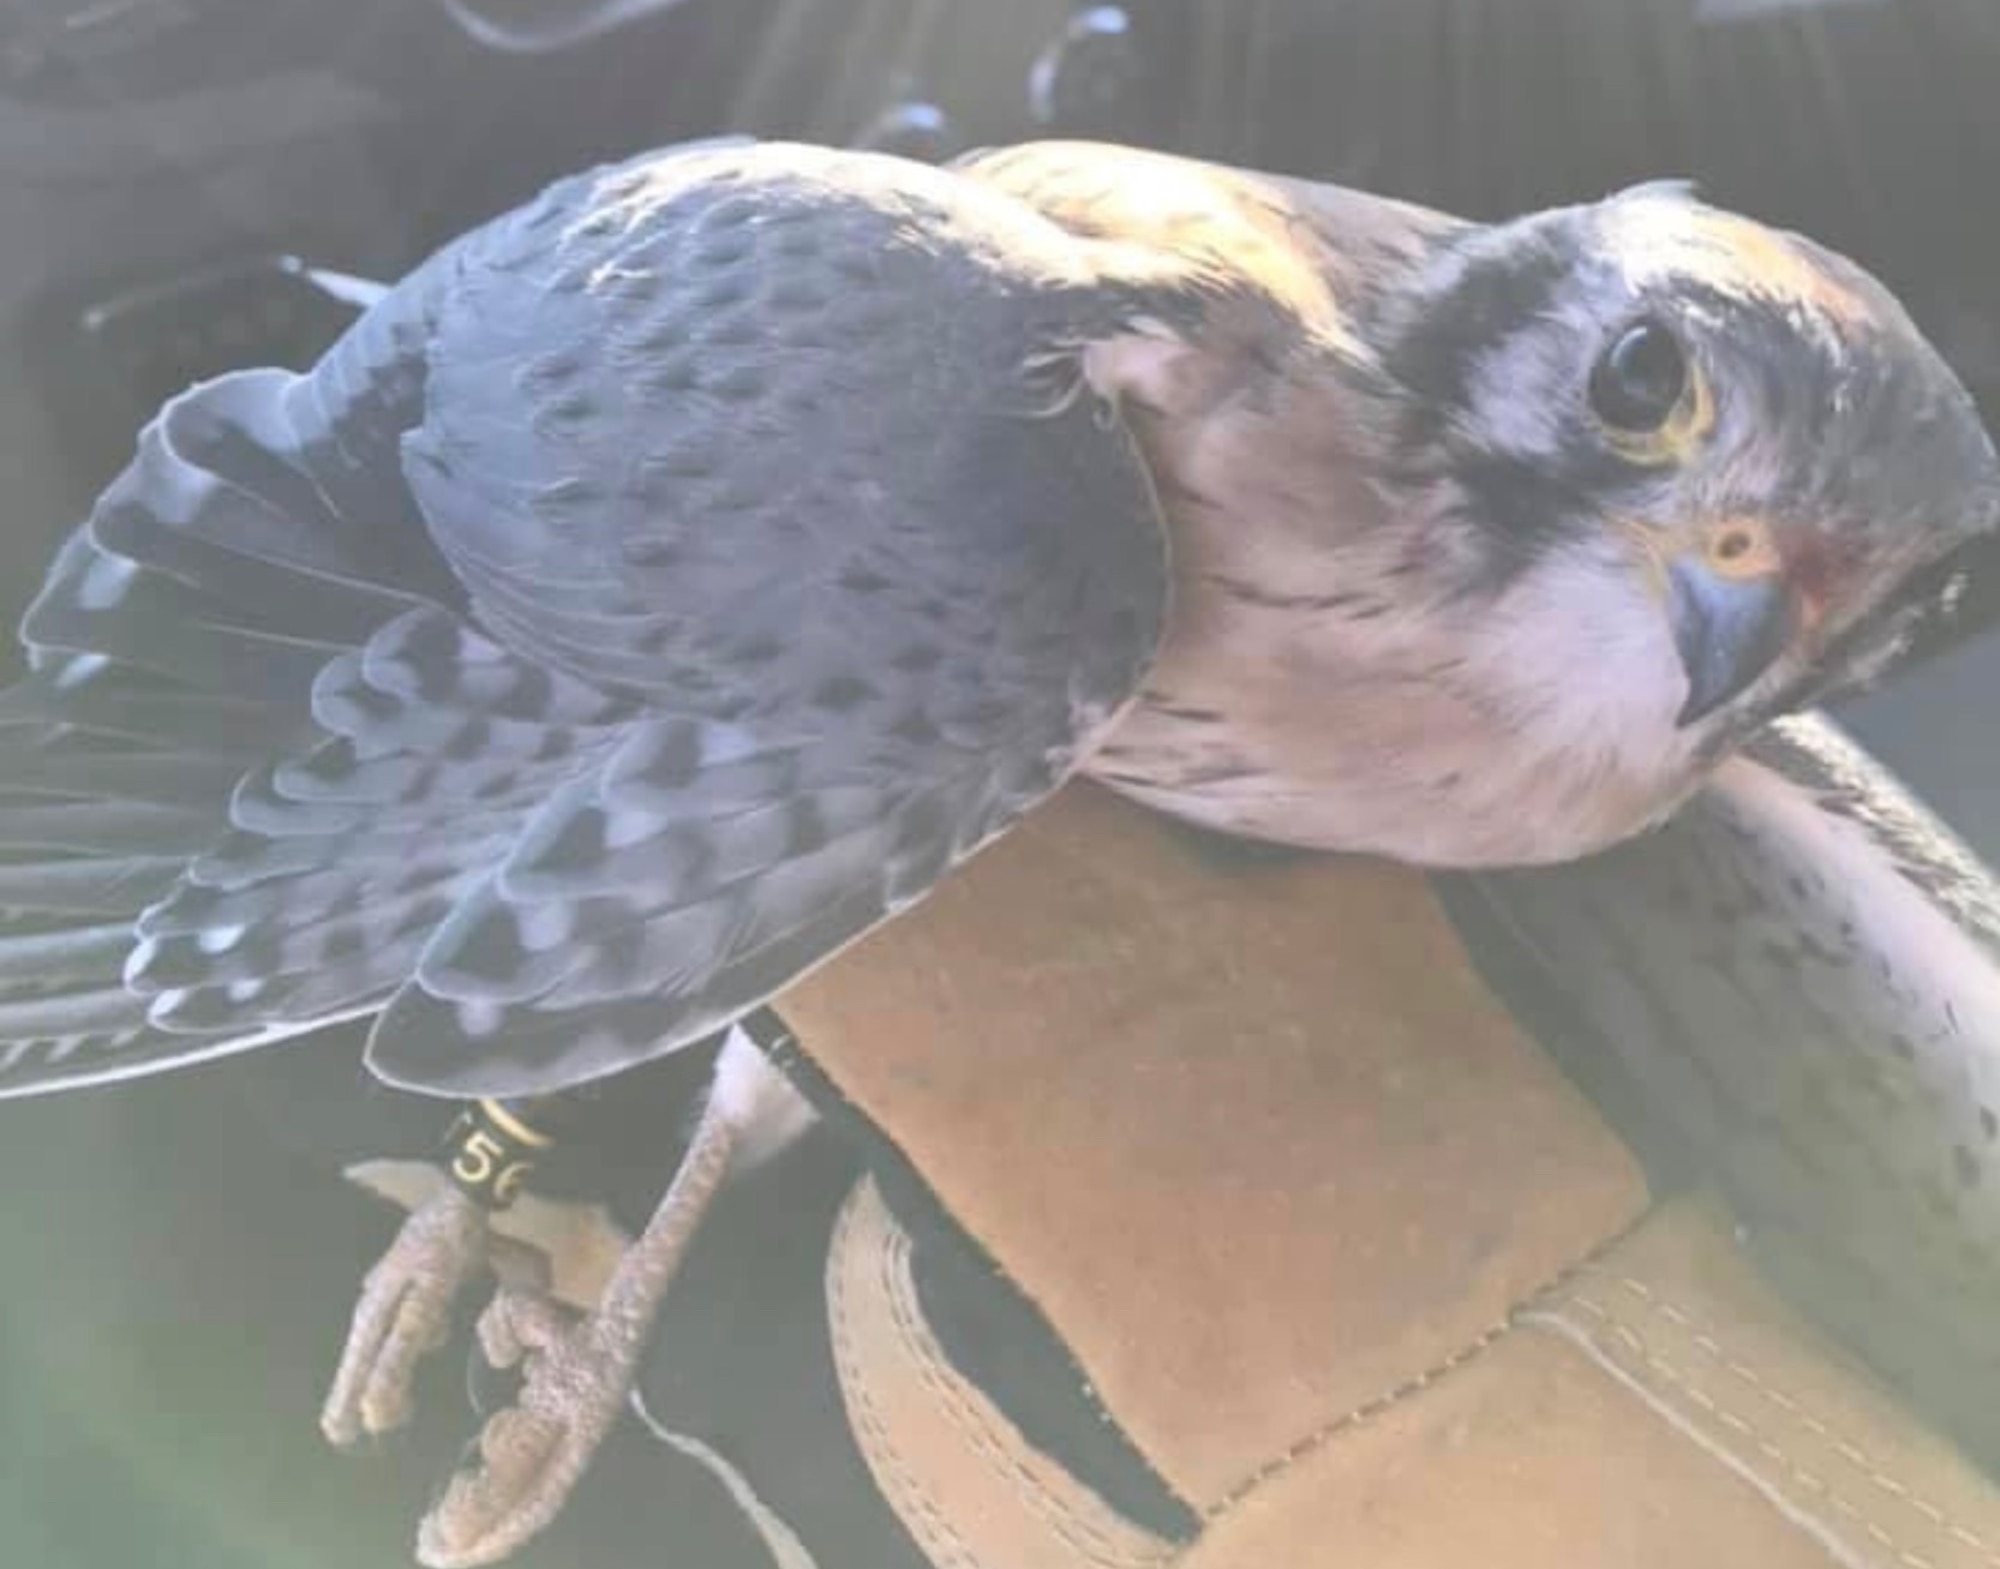 Wildlife biologists captured this American kestrel near the base's flight line. The bird will be taken to a new habitat as part of the Raptor Relocation Program, which focuses on trapping kestrels, hawks, owls, and other raptors and relocating the birds to safer and more suitable habitats away from the airfield. (Courtesy photo)